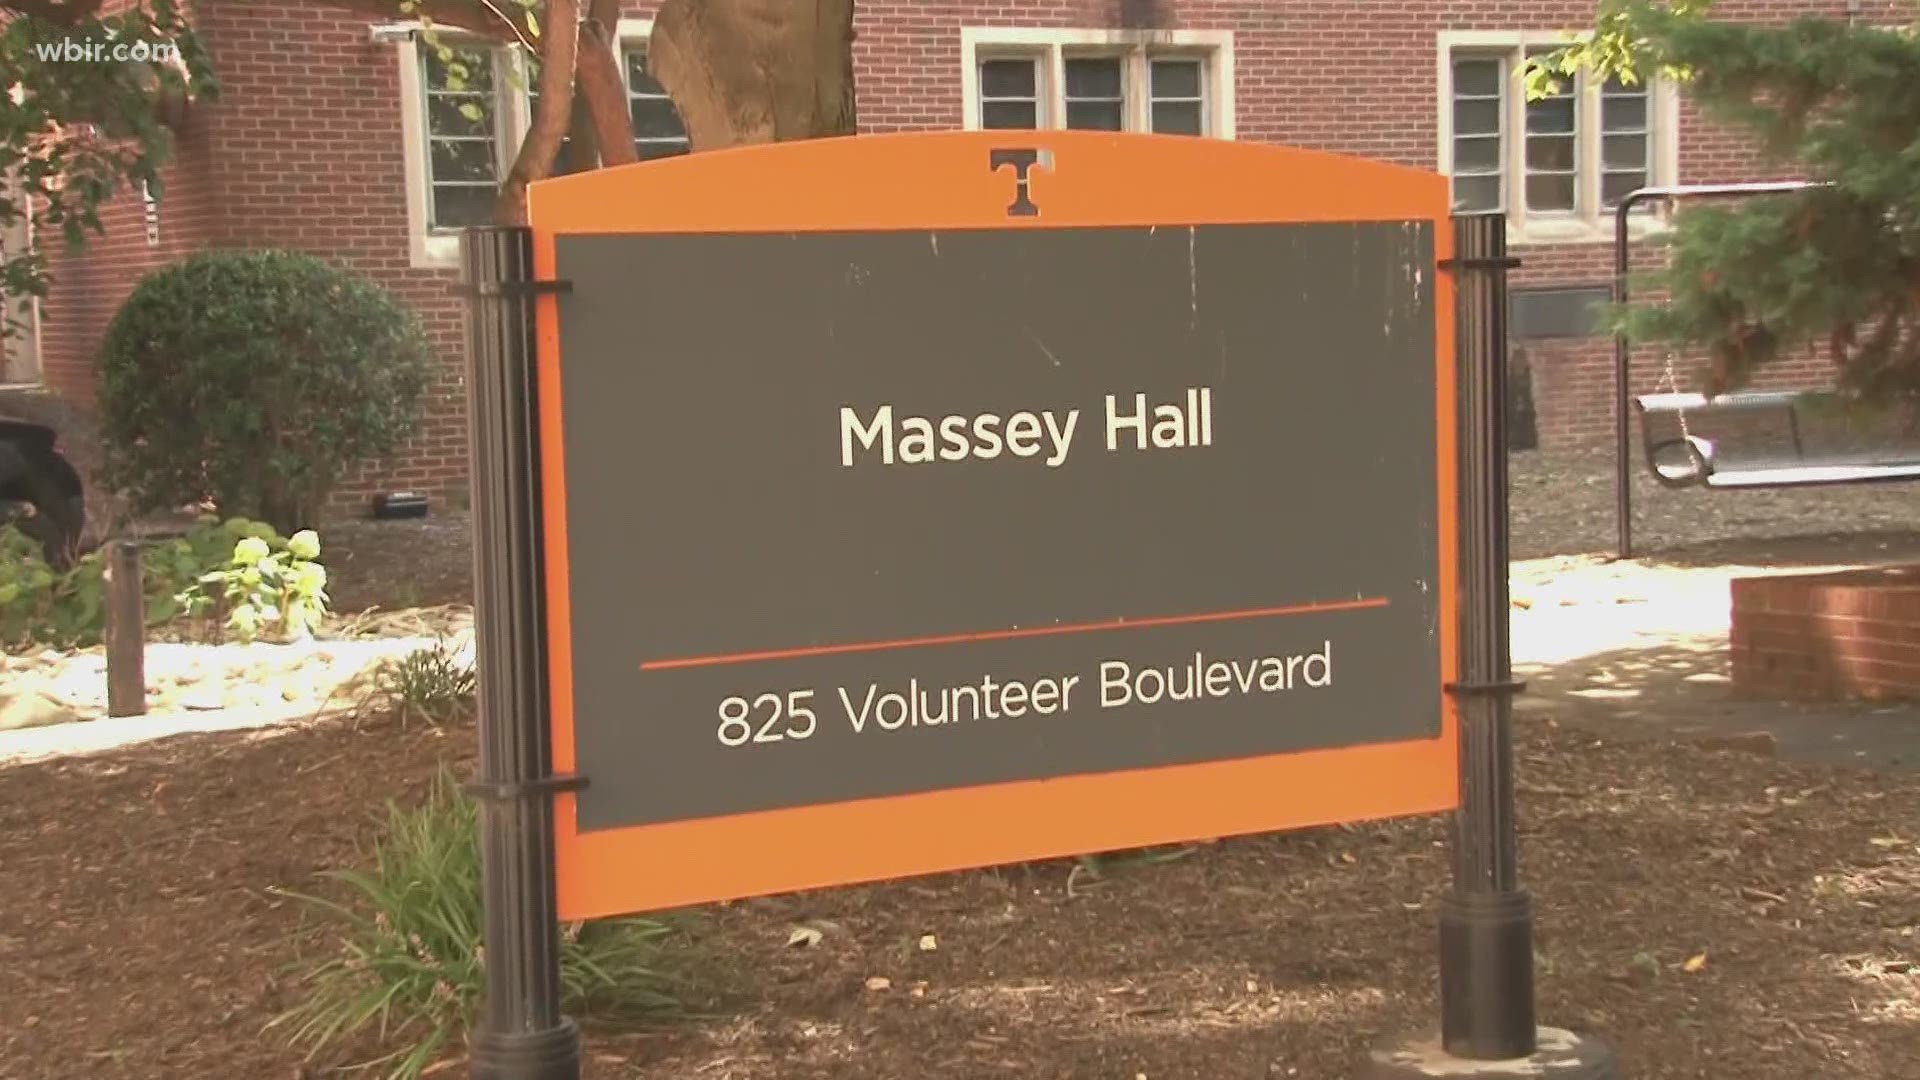 The University of Tennessee closed Massey Hall after reporting 2,012 people in isolation.